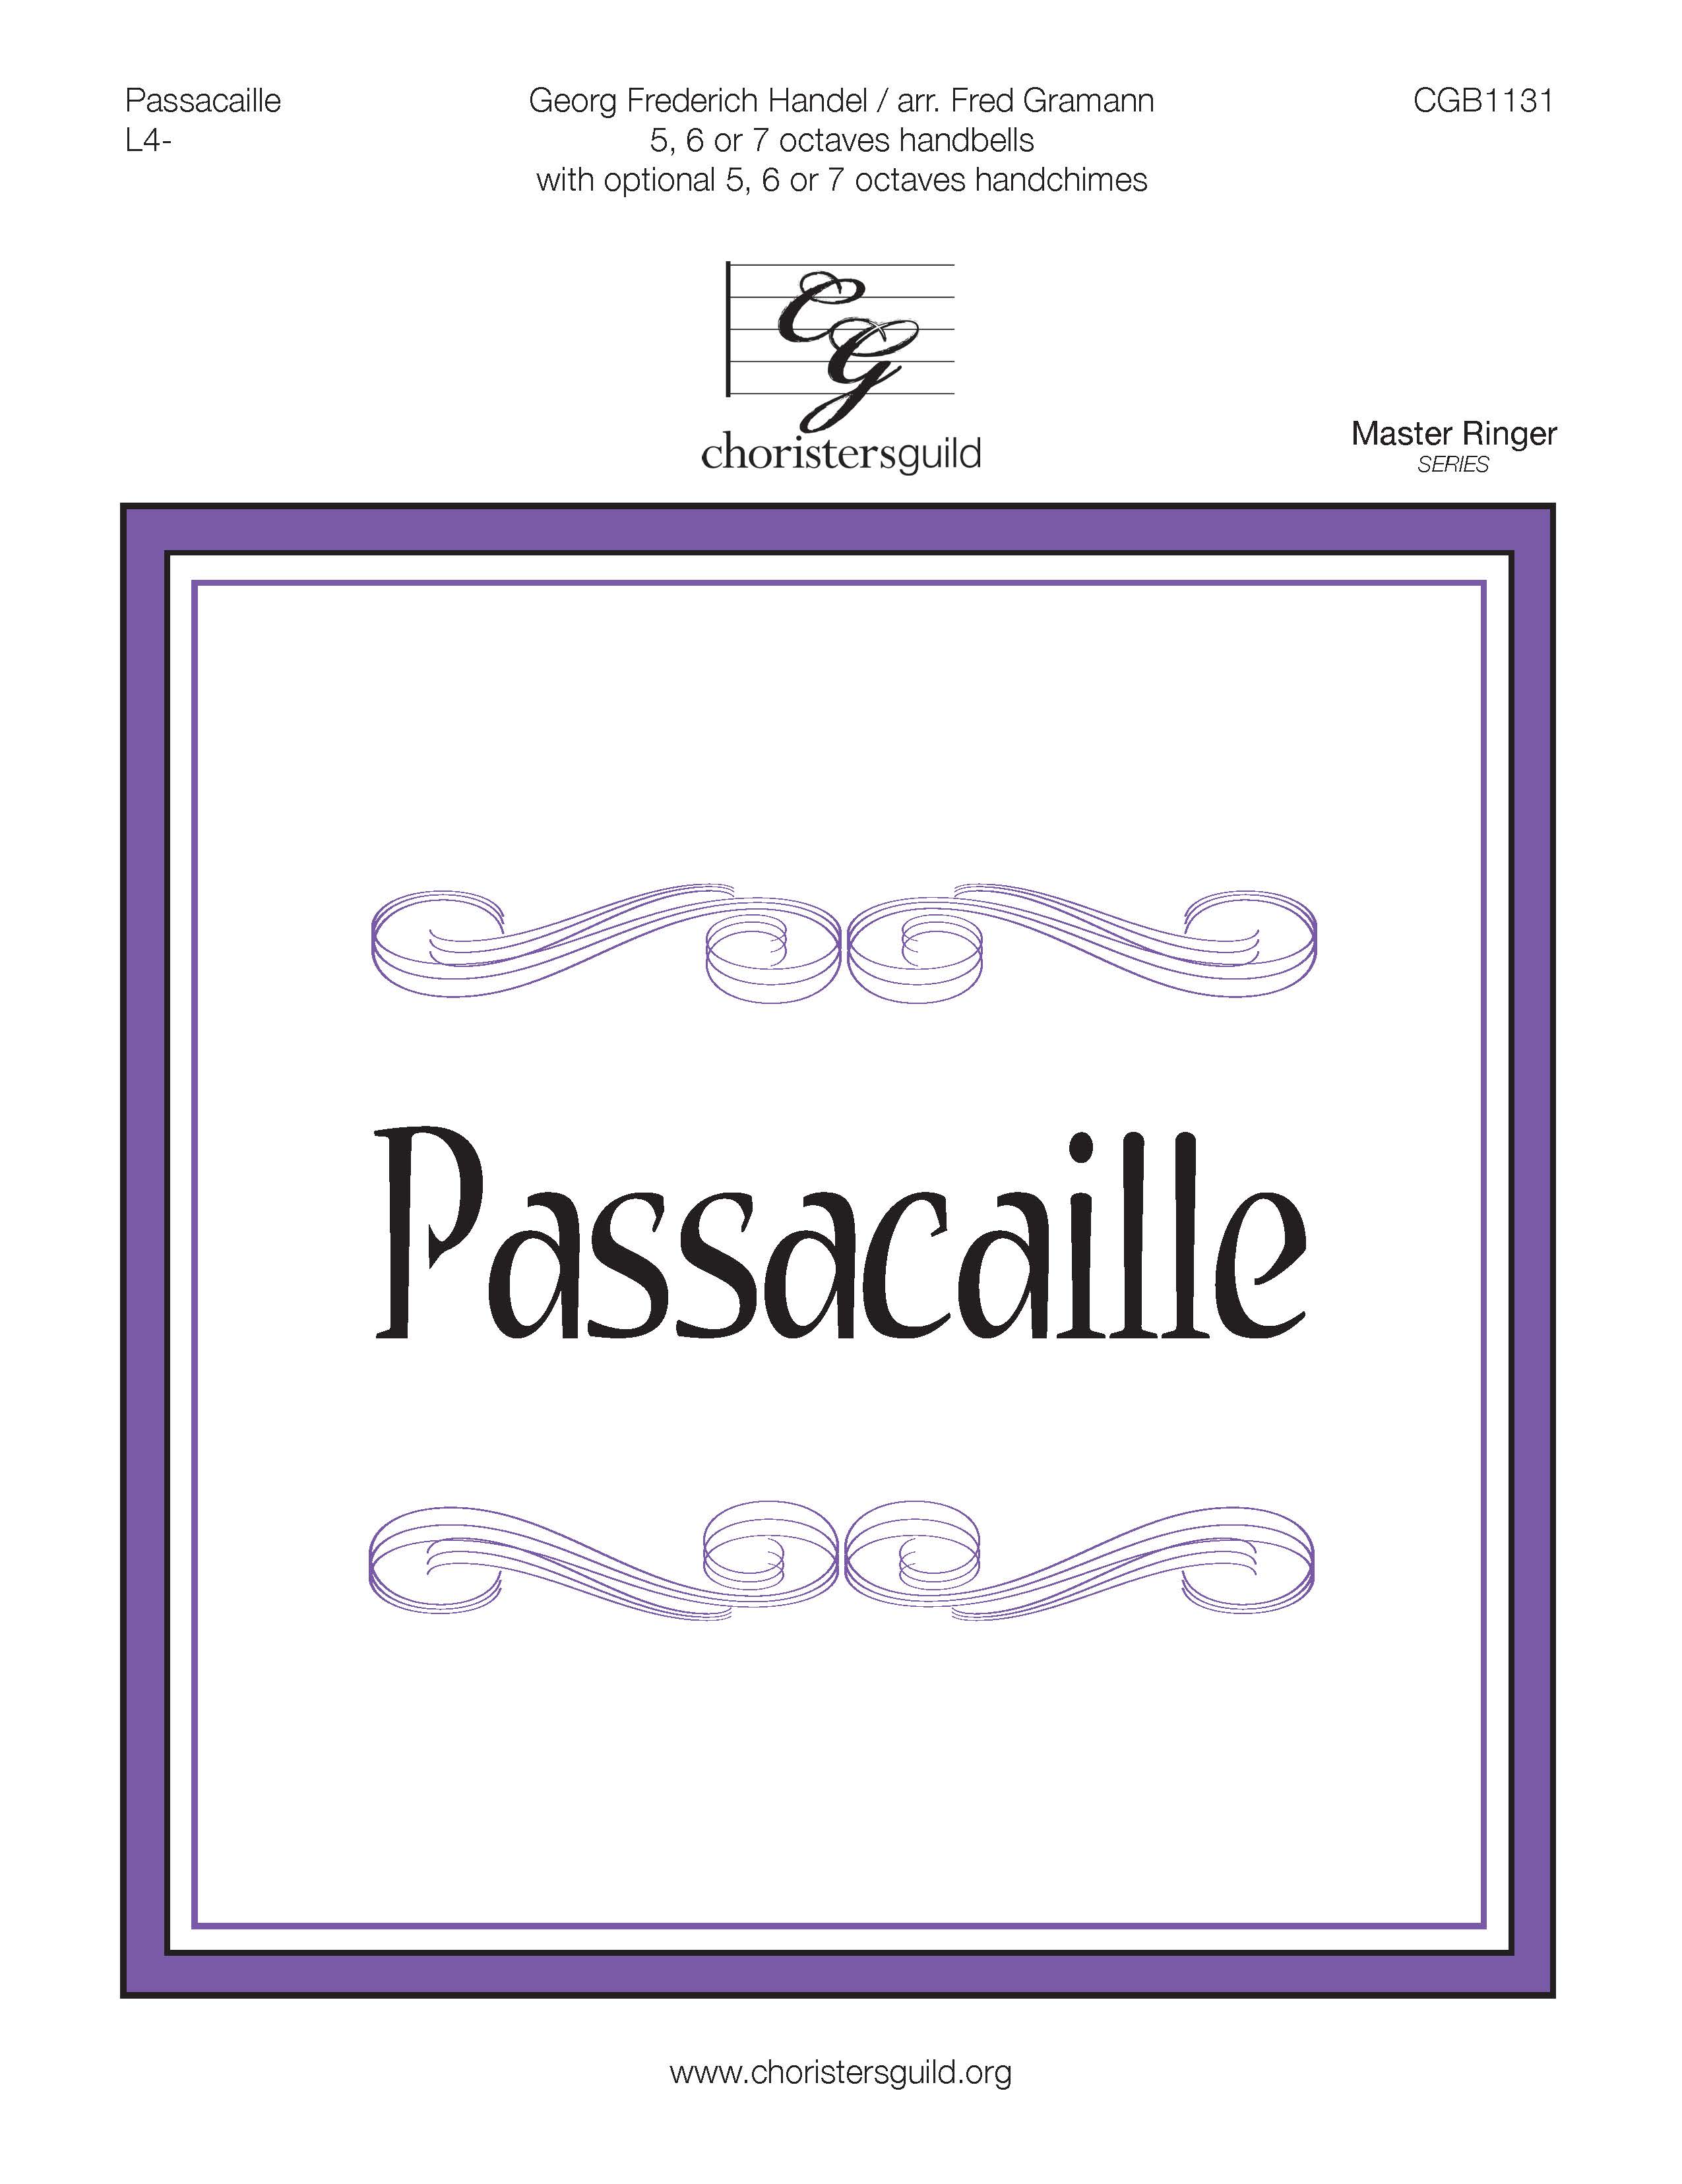 Passacaille - 5-7 octaves